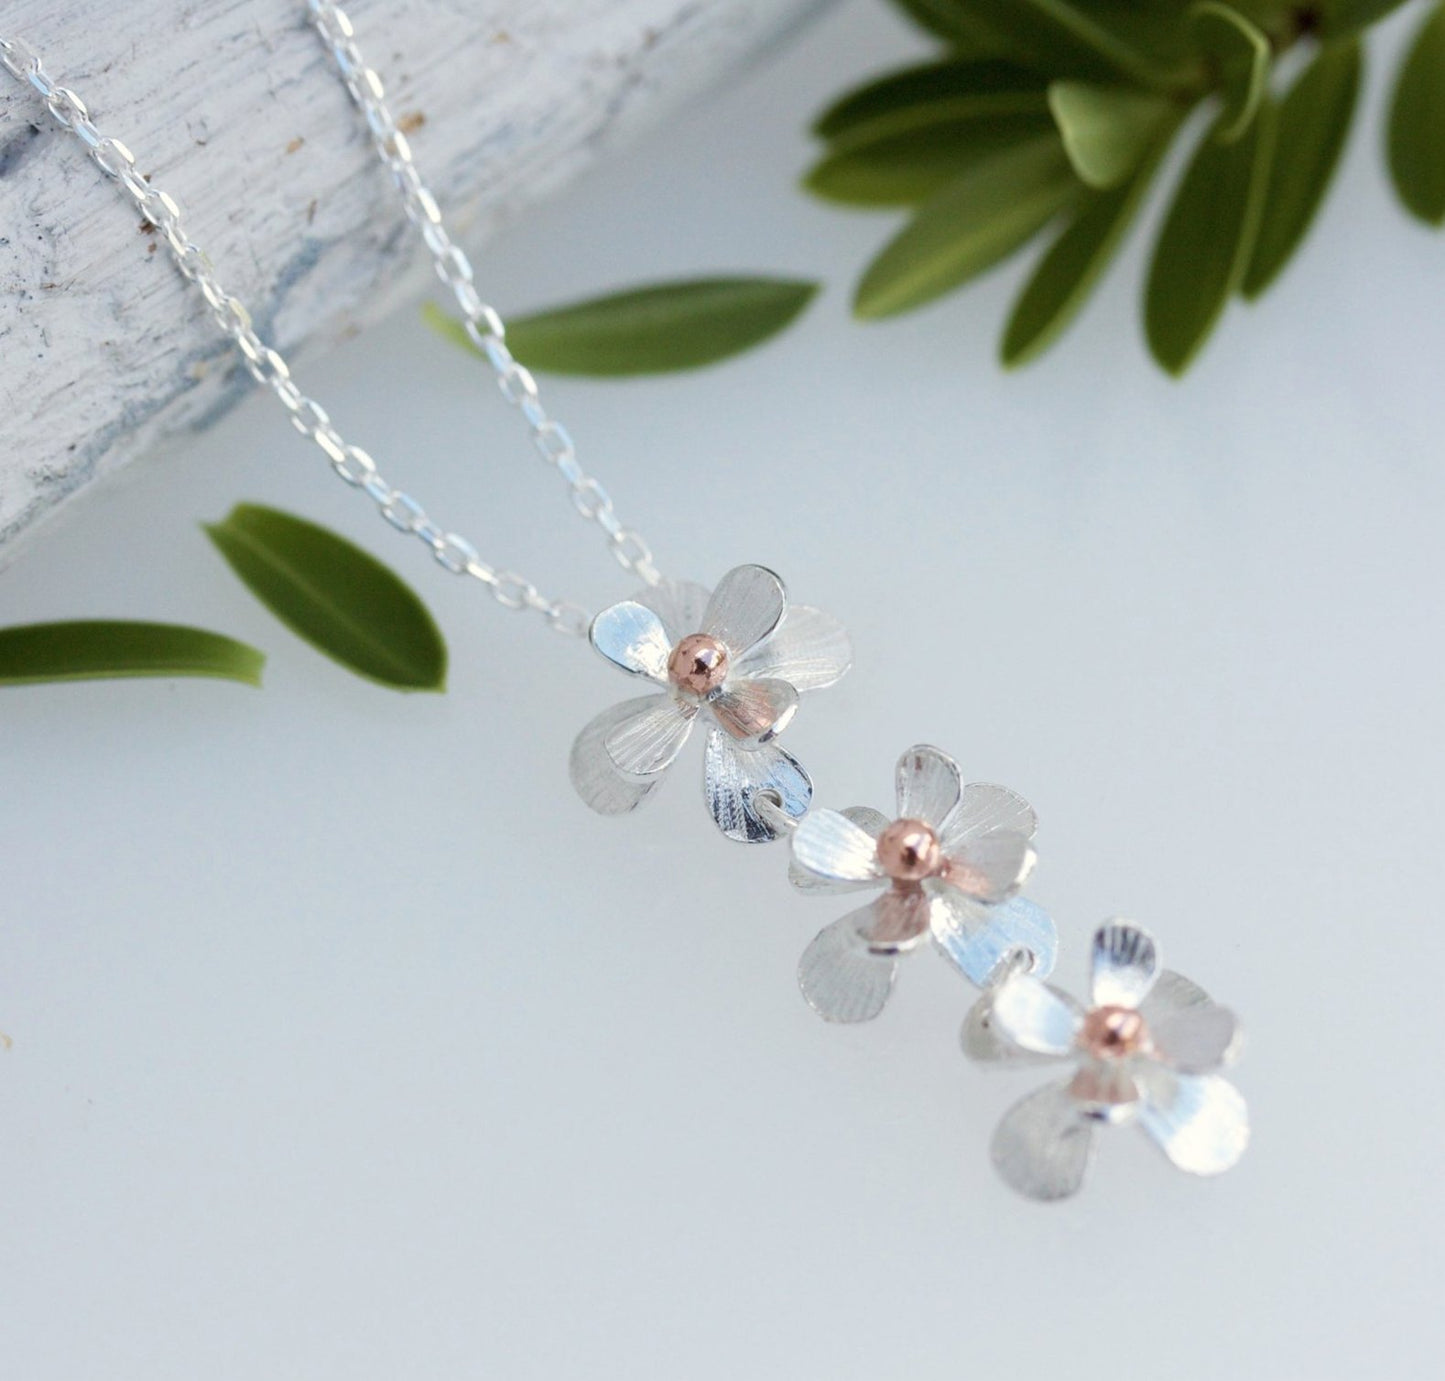 Silver and Rose Gold Daisy Chain Necklace